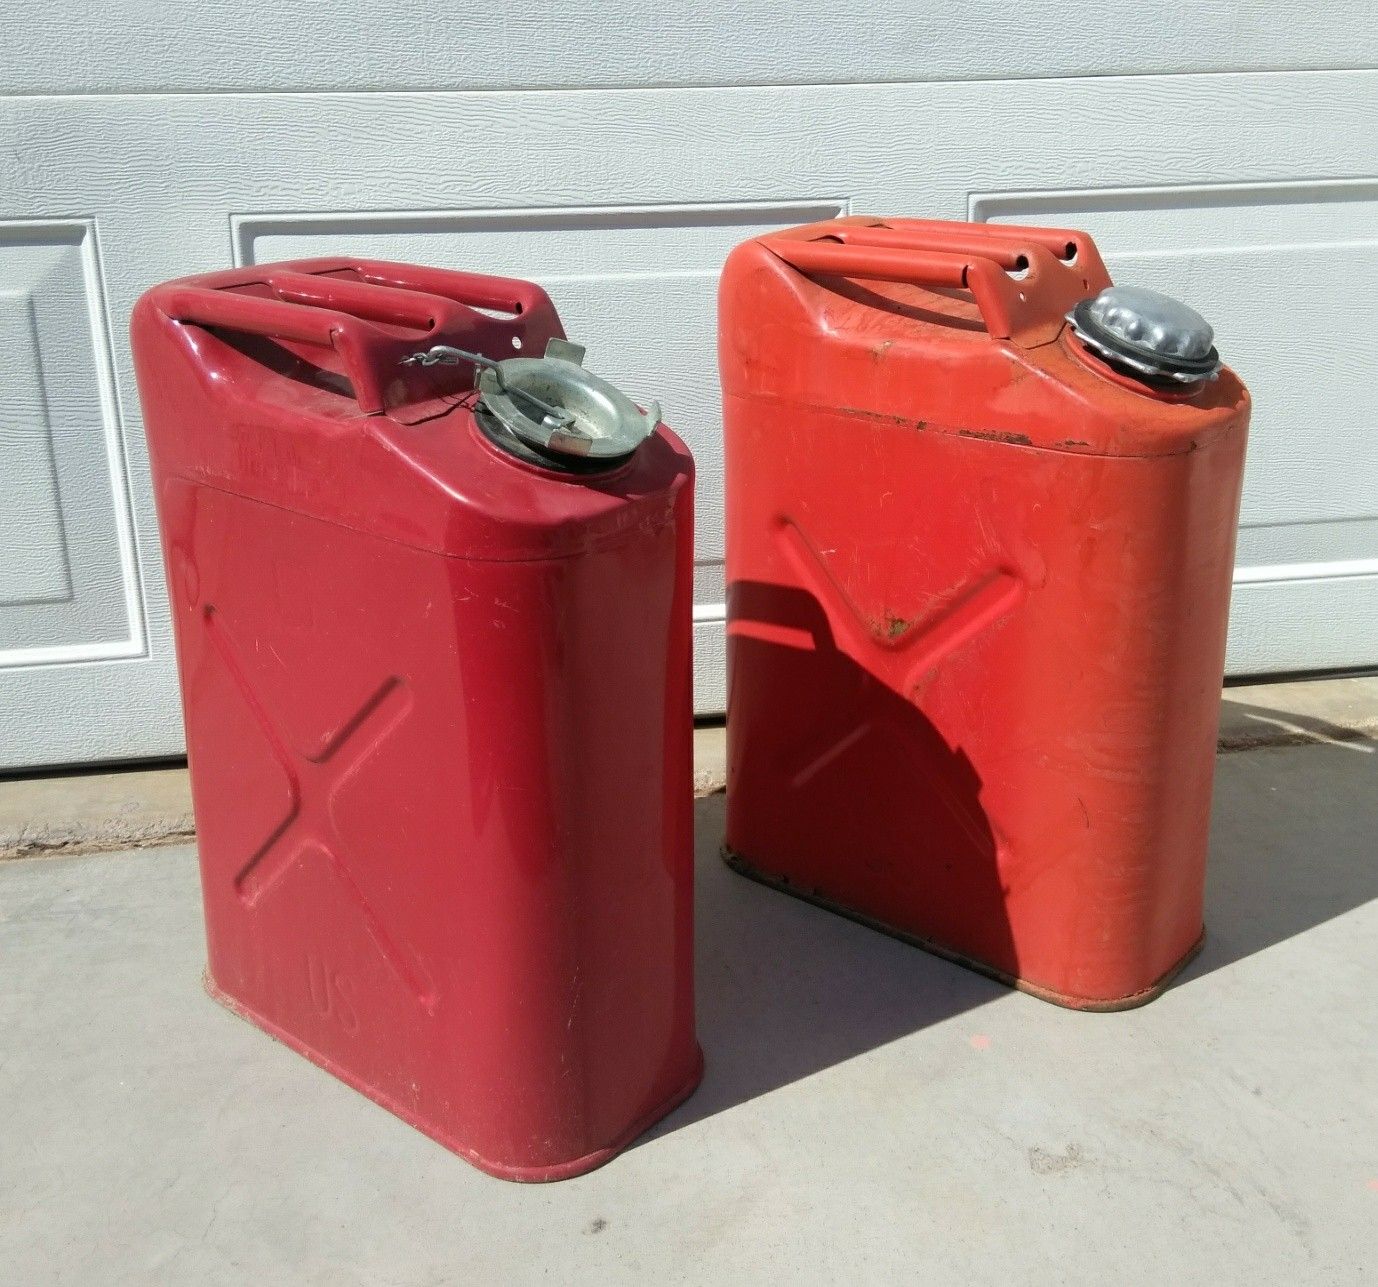 5 Gallon Metal Gas Cans PRICE is FIRM